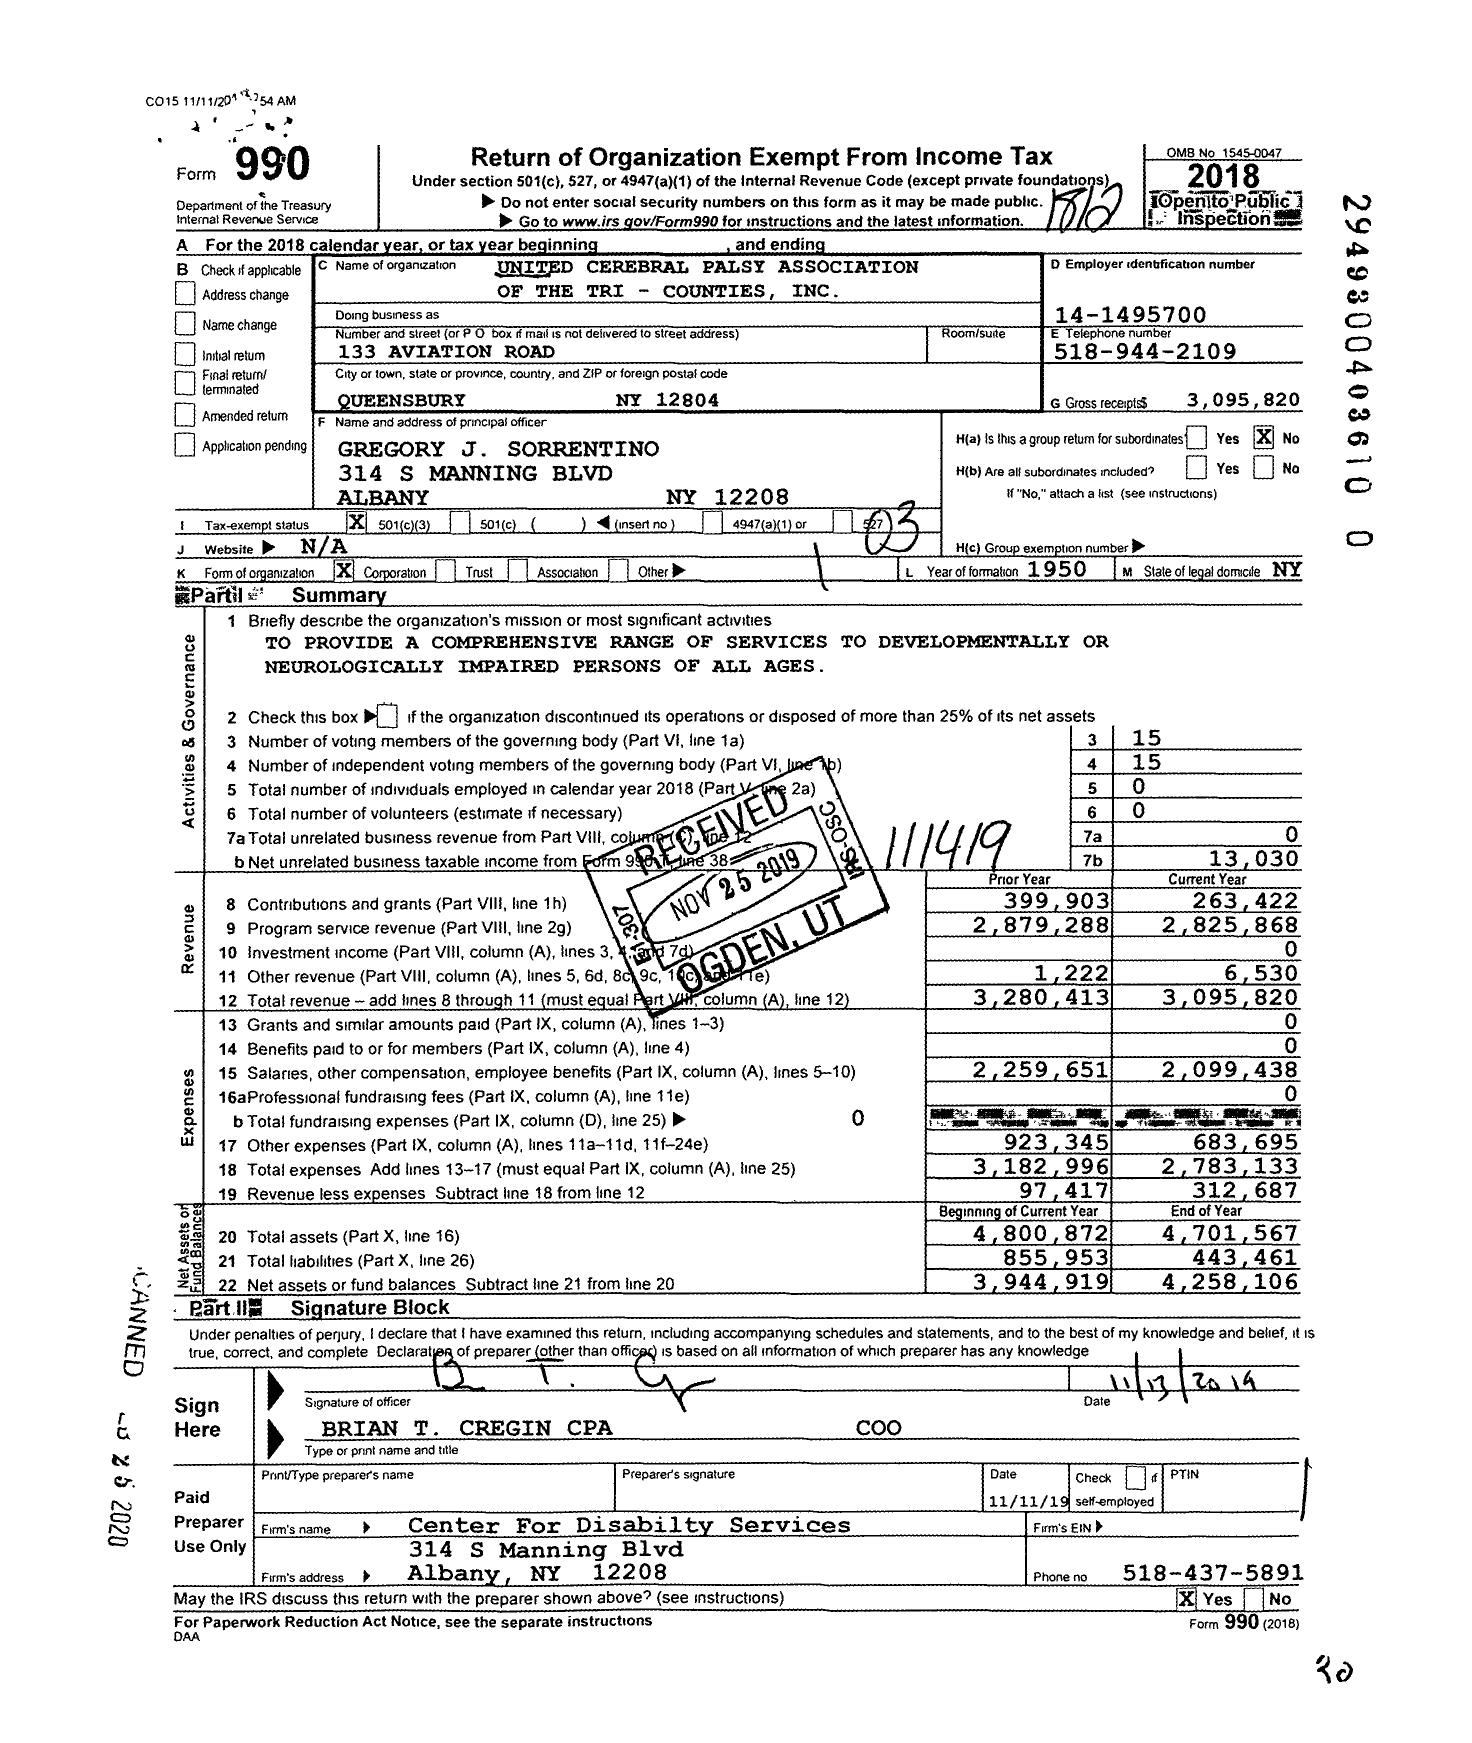 Image of first page of 2018 Form 990 for United Cerebral Palsy Association of the Tri - Counties